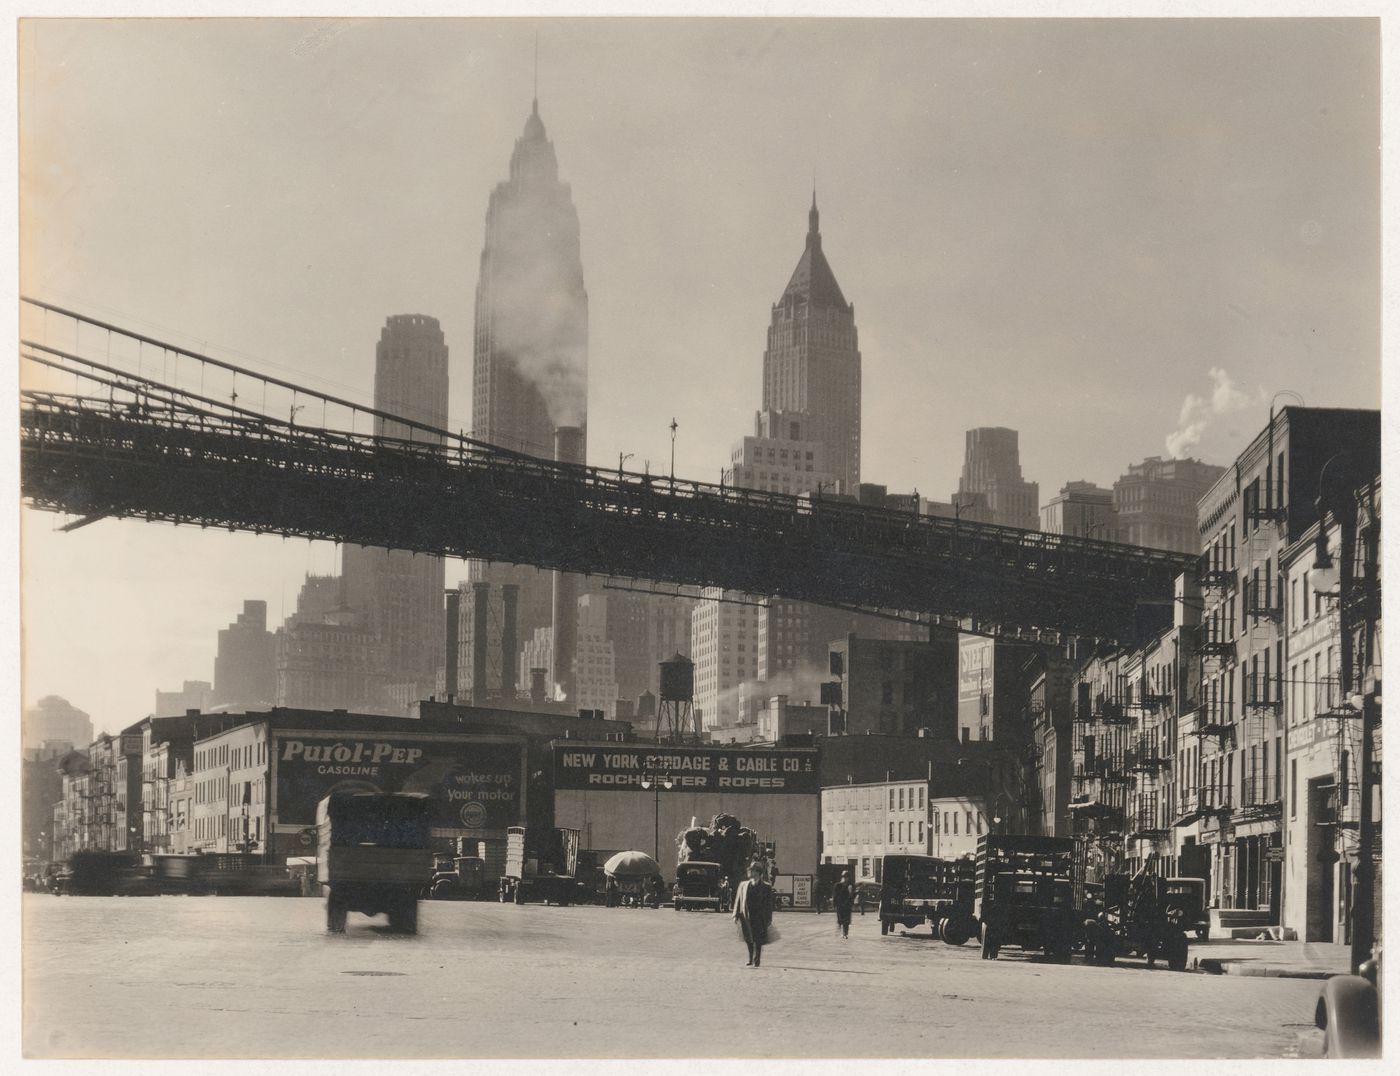 East River frontage, South Street, New York City, New York